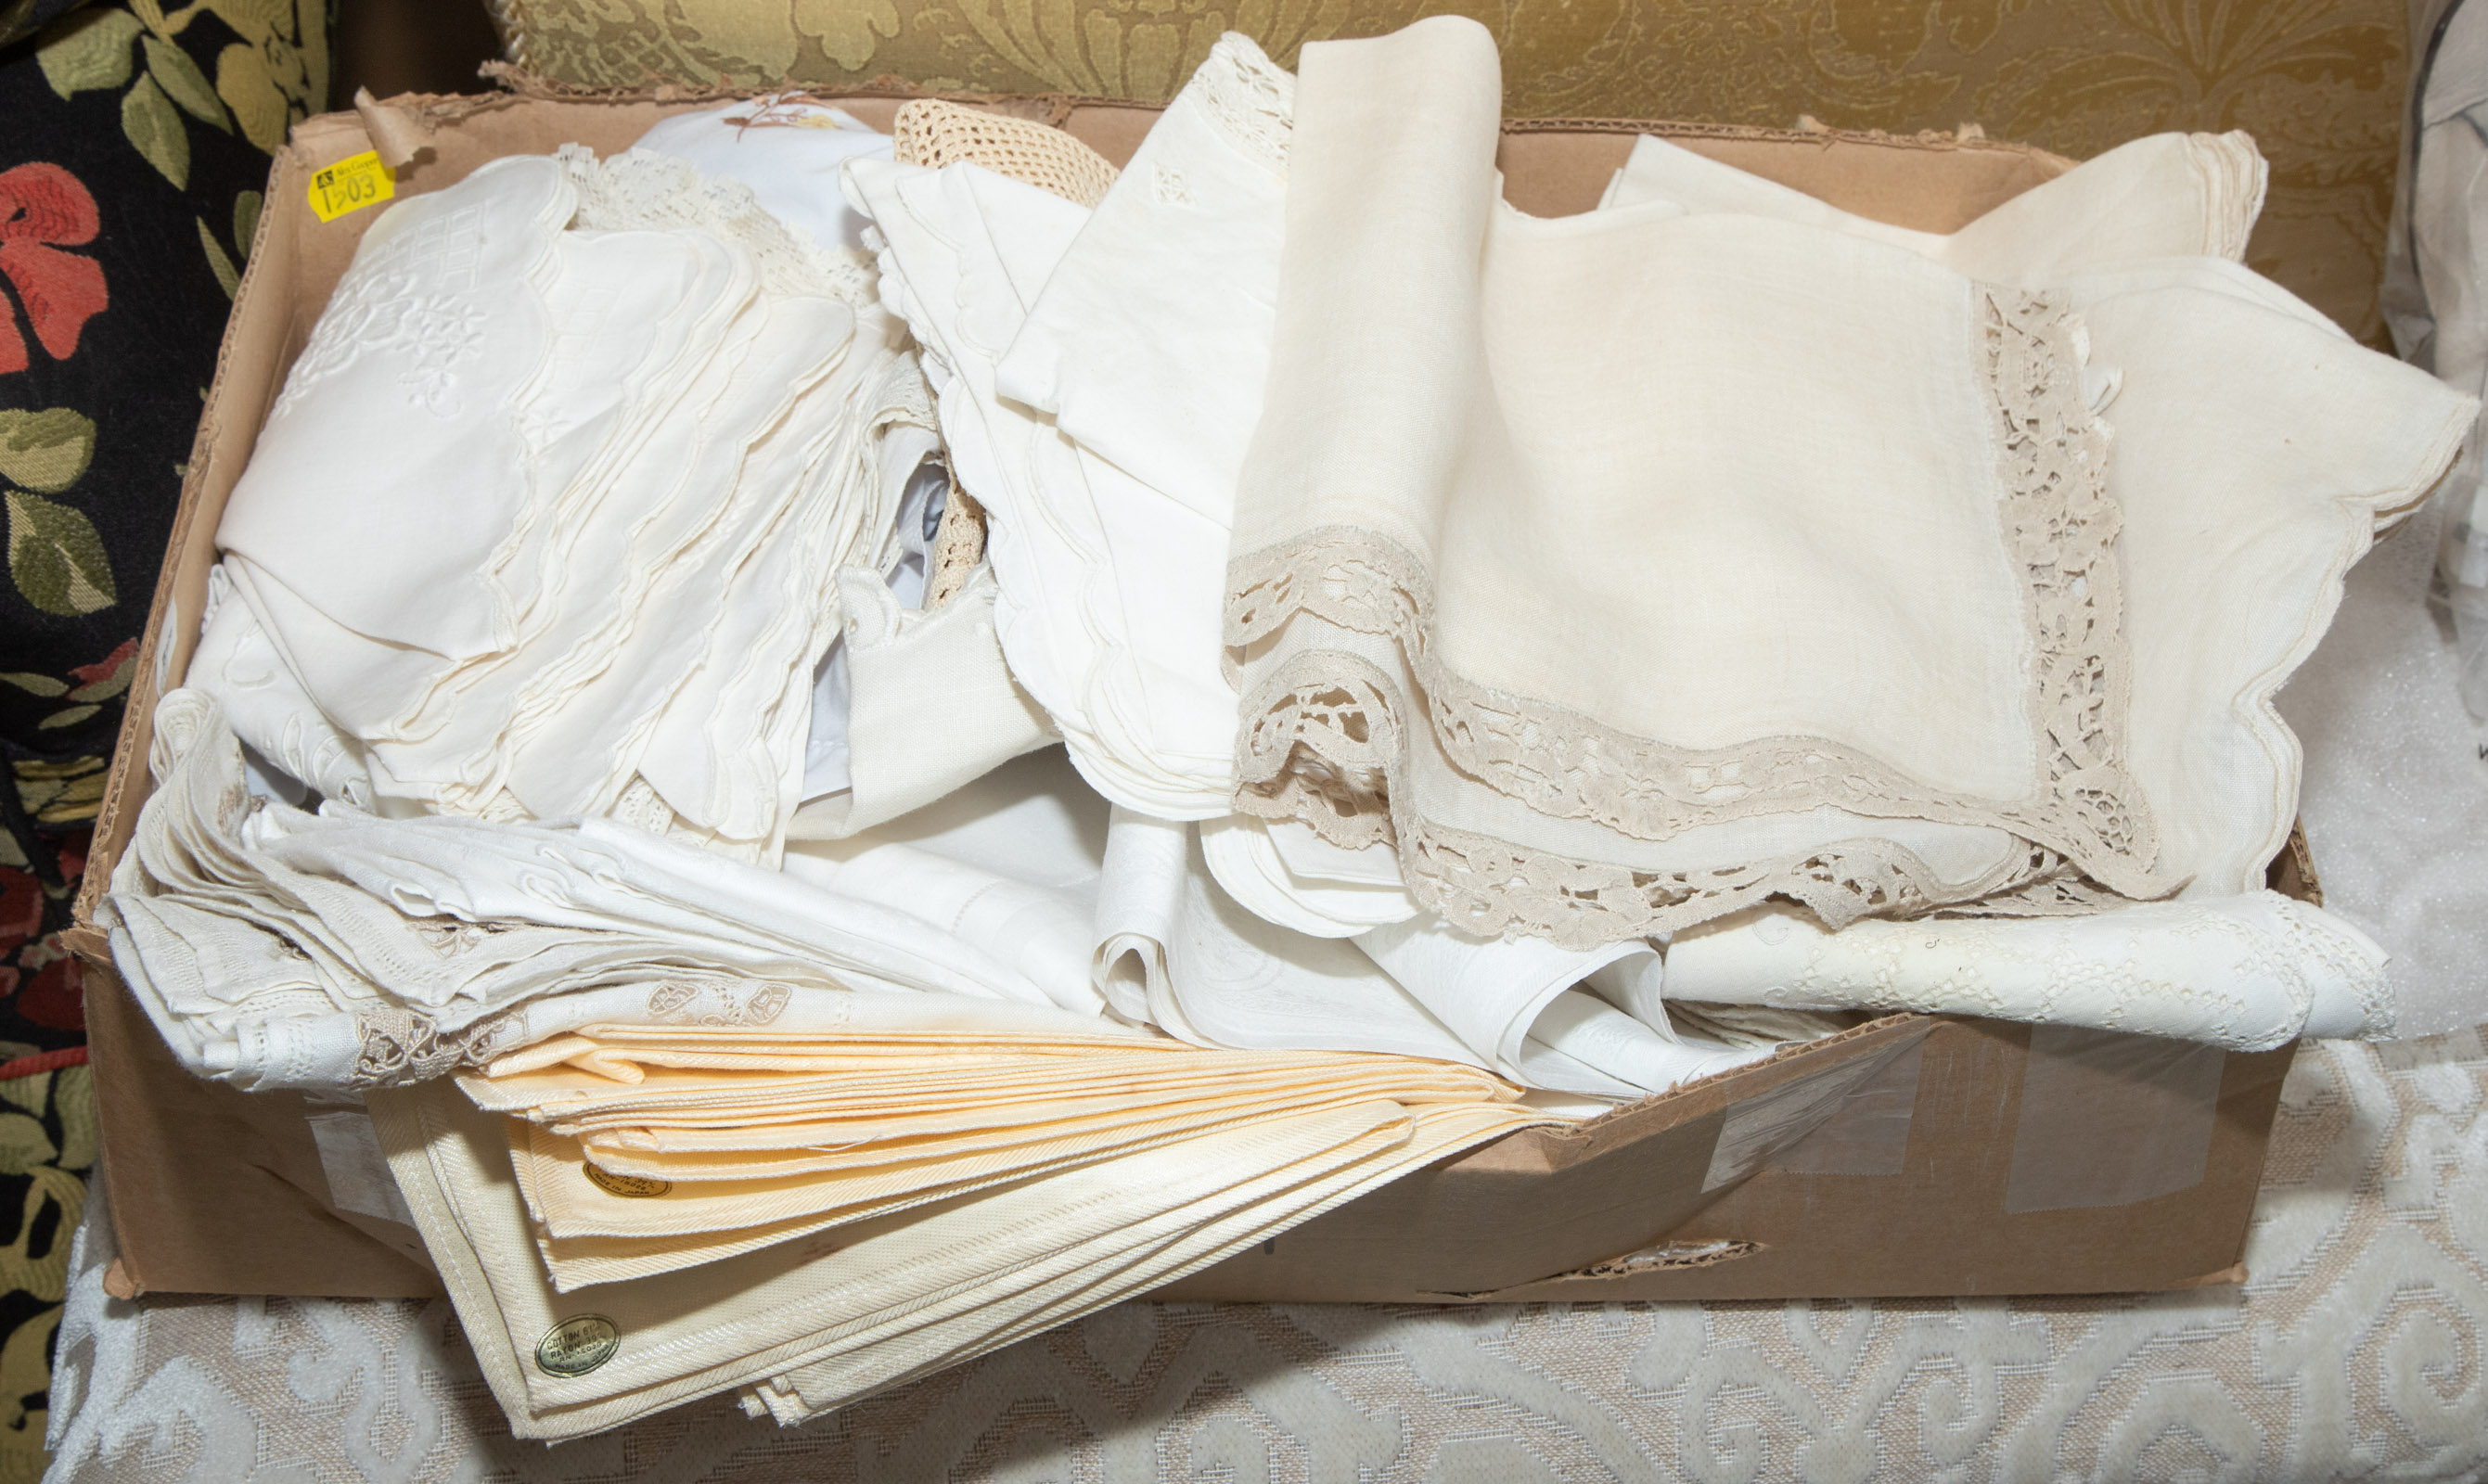 GROUP OF VINTAGE TABLE LINENS Including